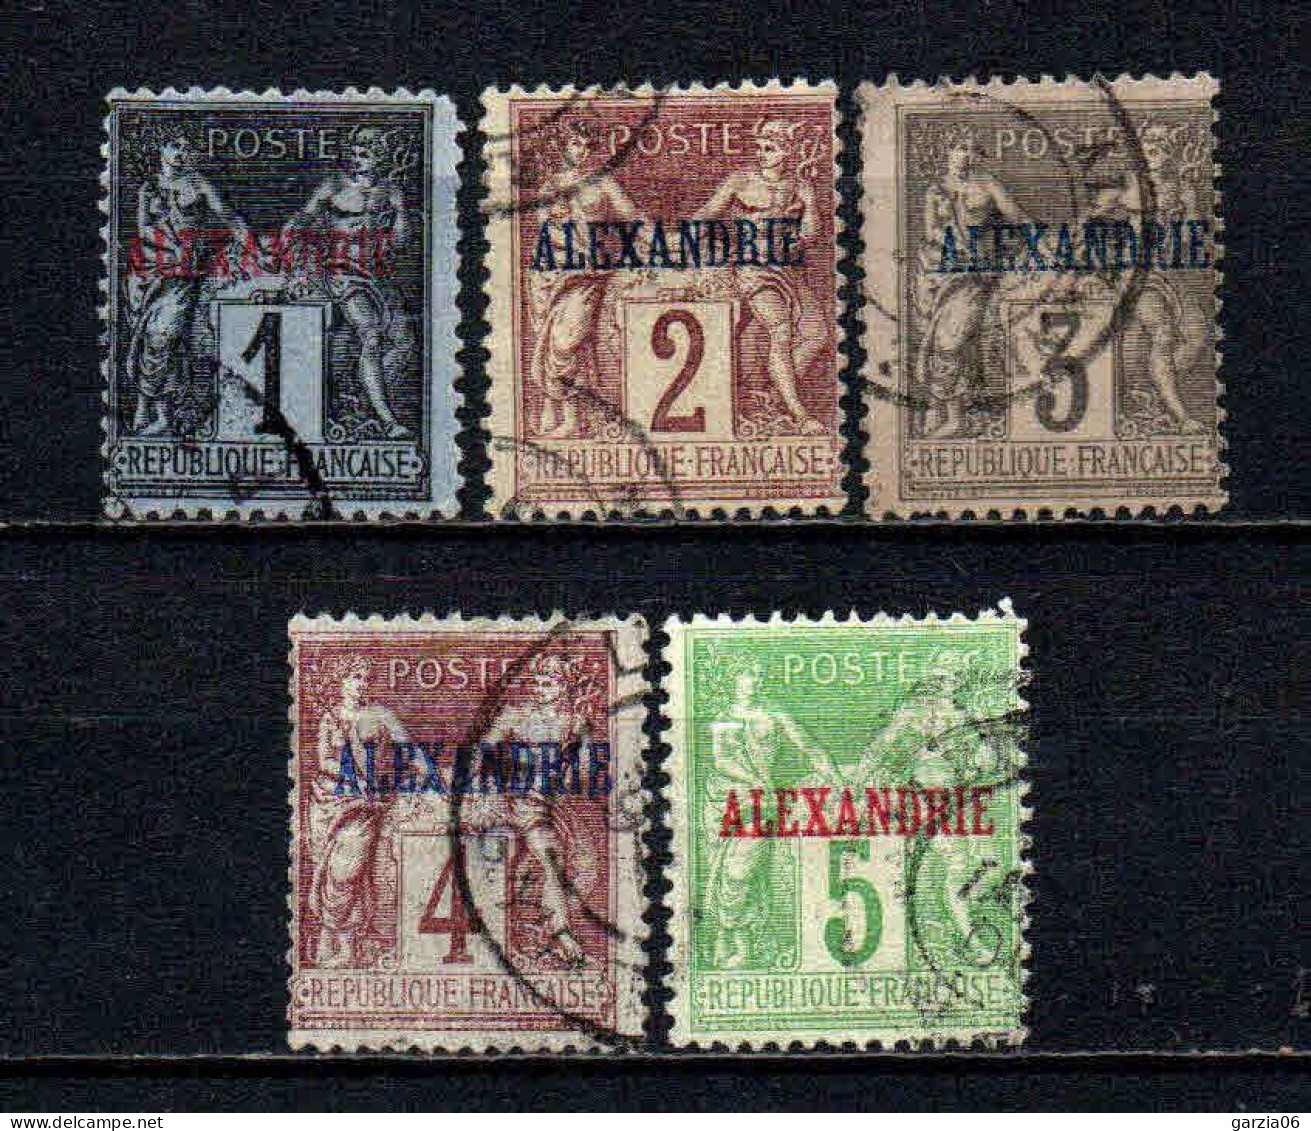 Alexandrie - 1899 -  Type Sage  -  N° 1 à 5 - Oblit - Used - Used Stamps